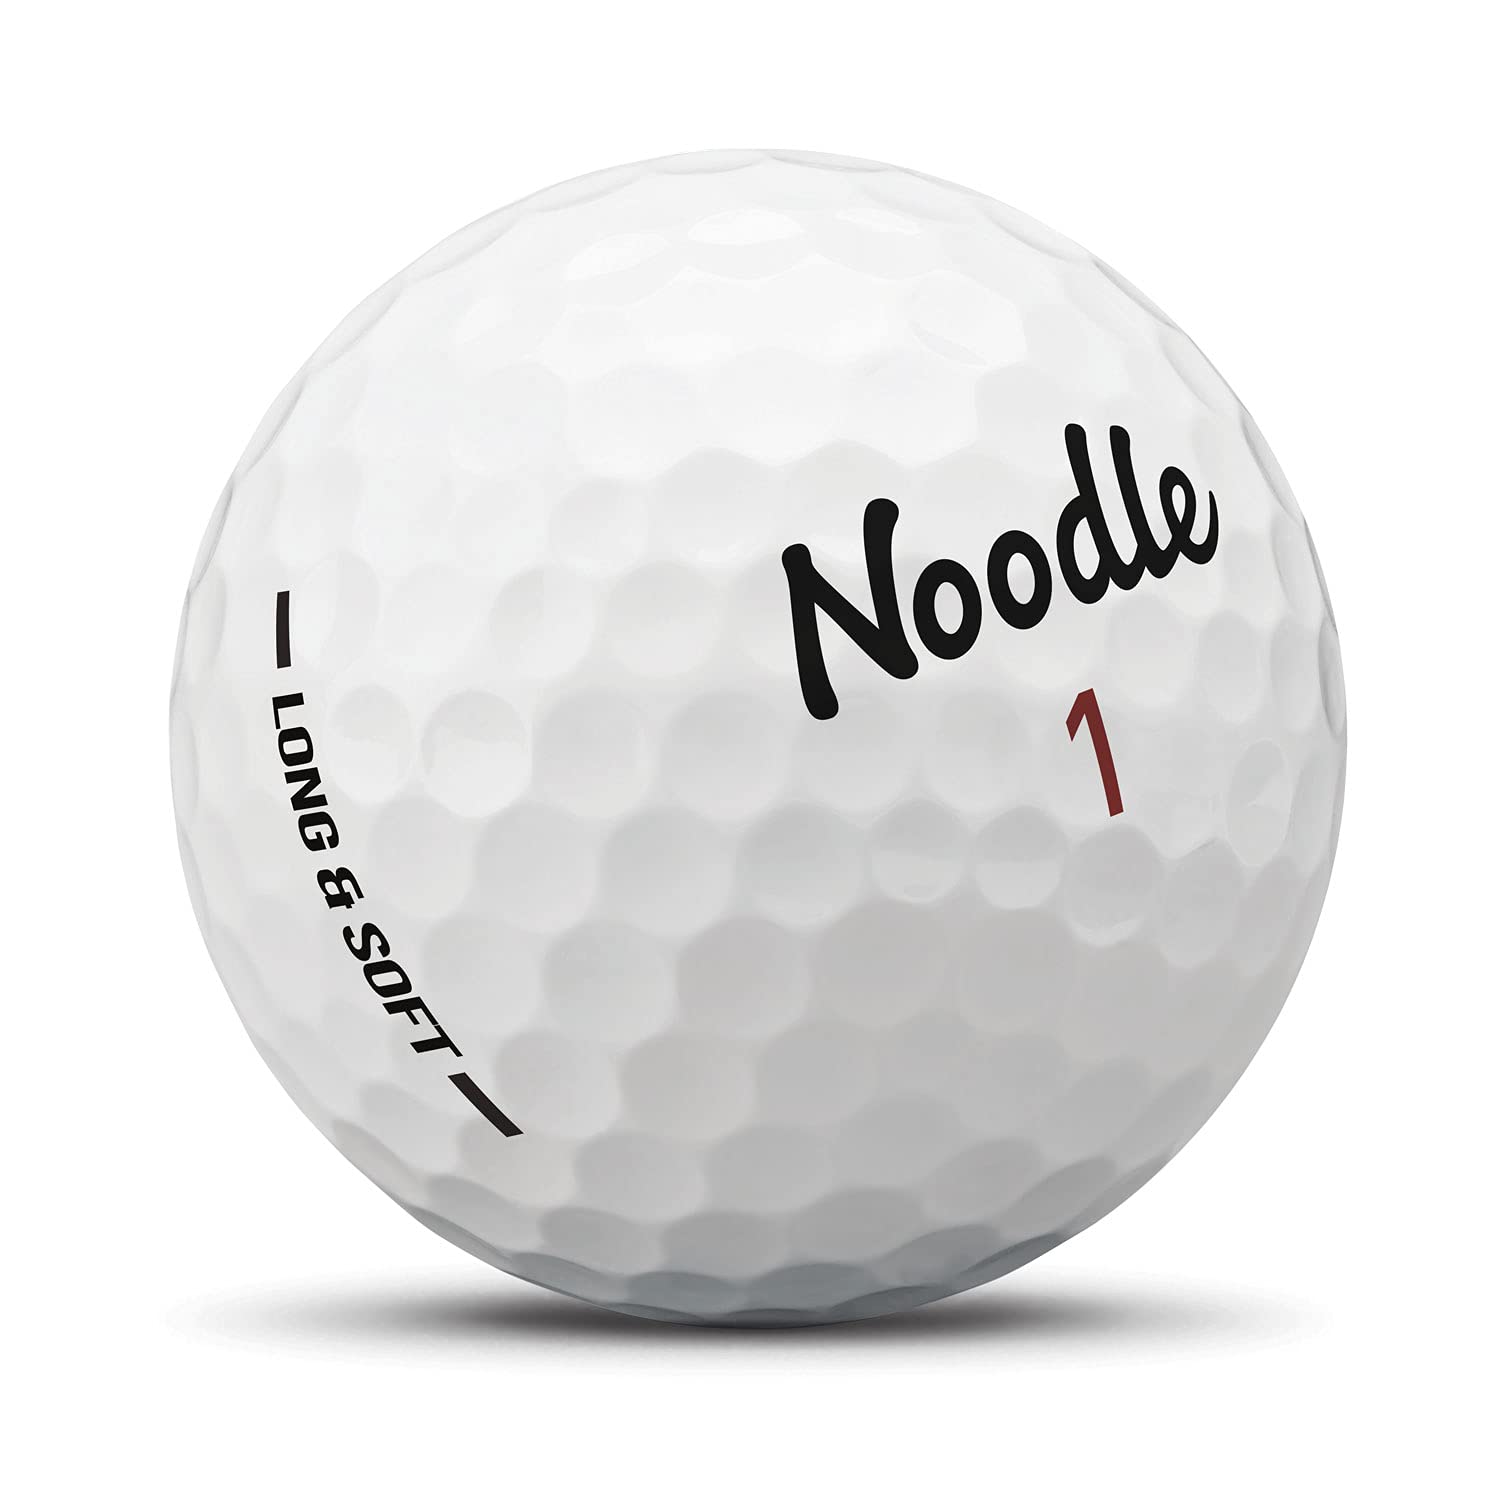 TaylorMade Noodle 22 Long & Soft 15bp